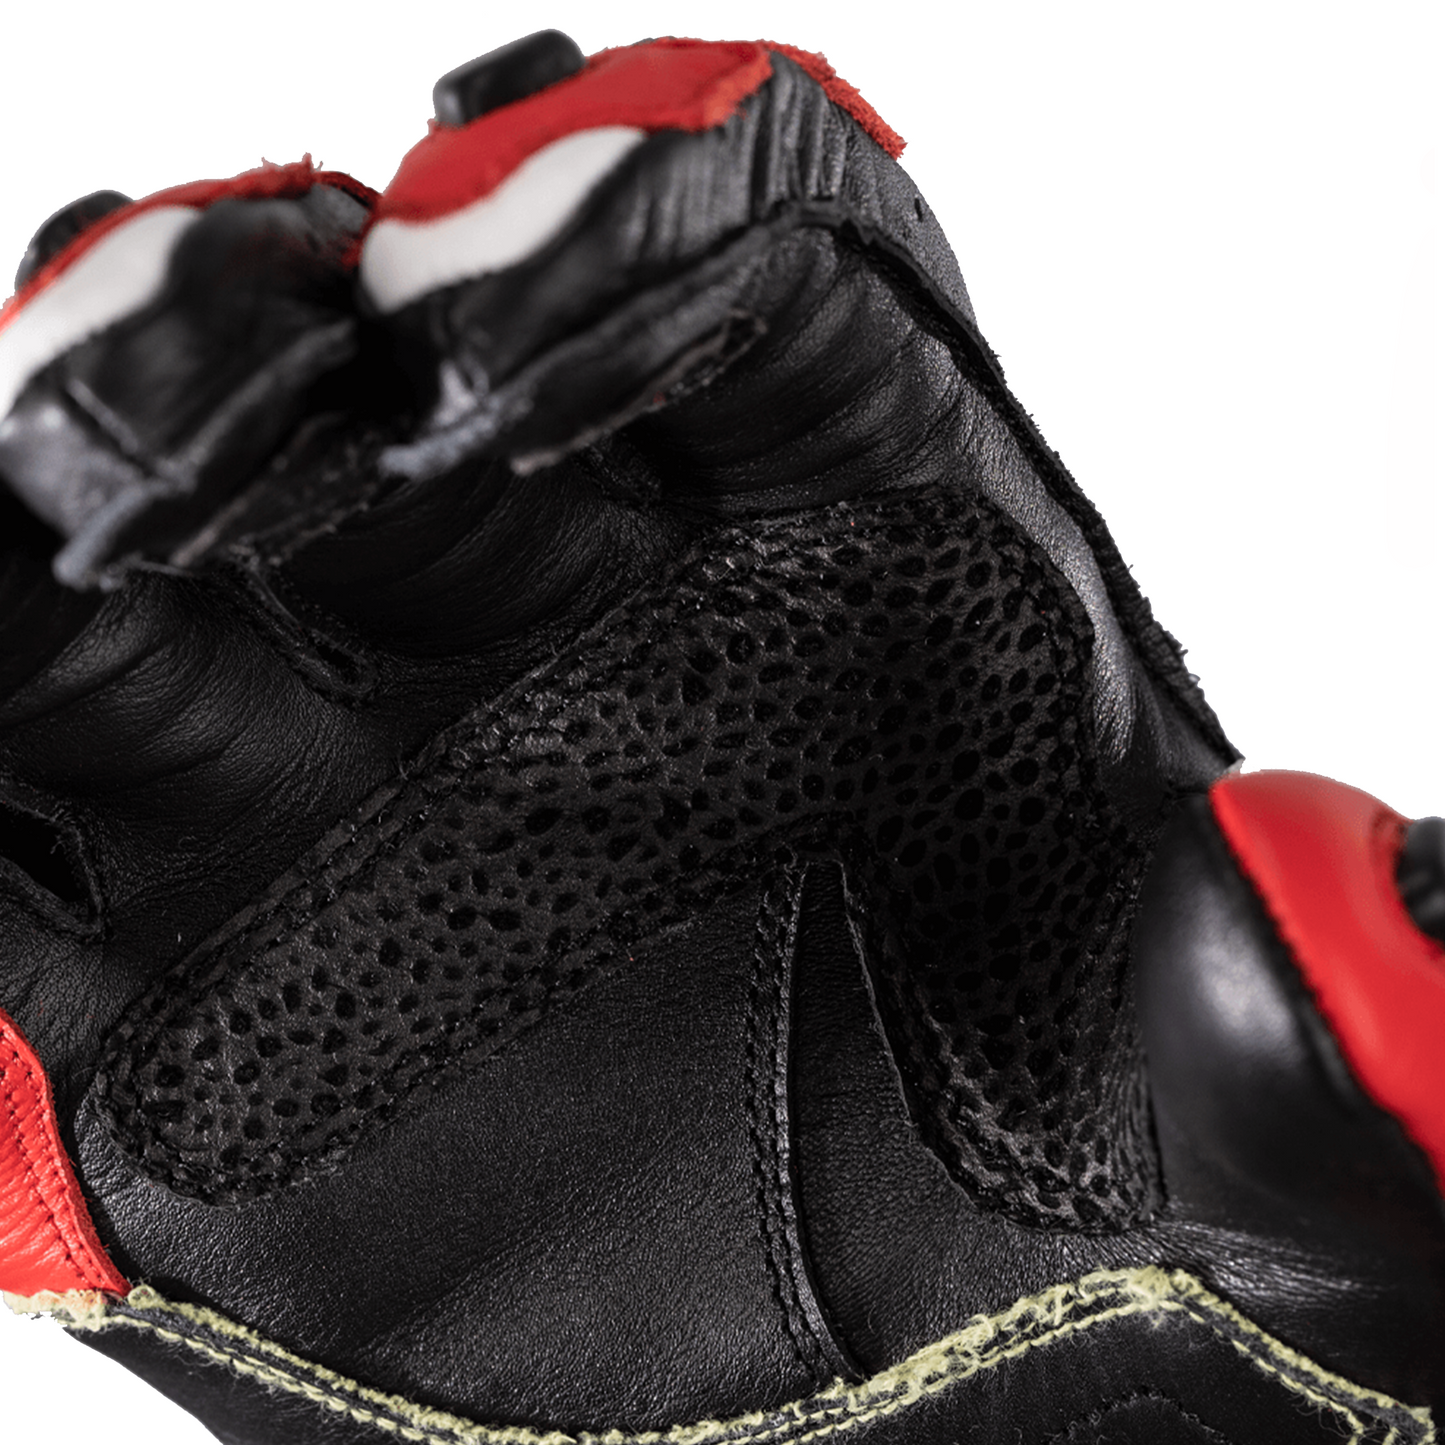 RST Tractech Evo 4 (CE) Gloves - Red